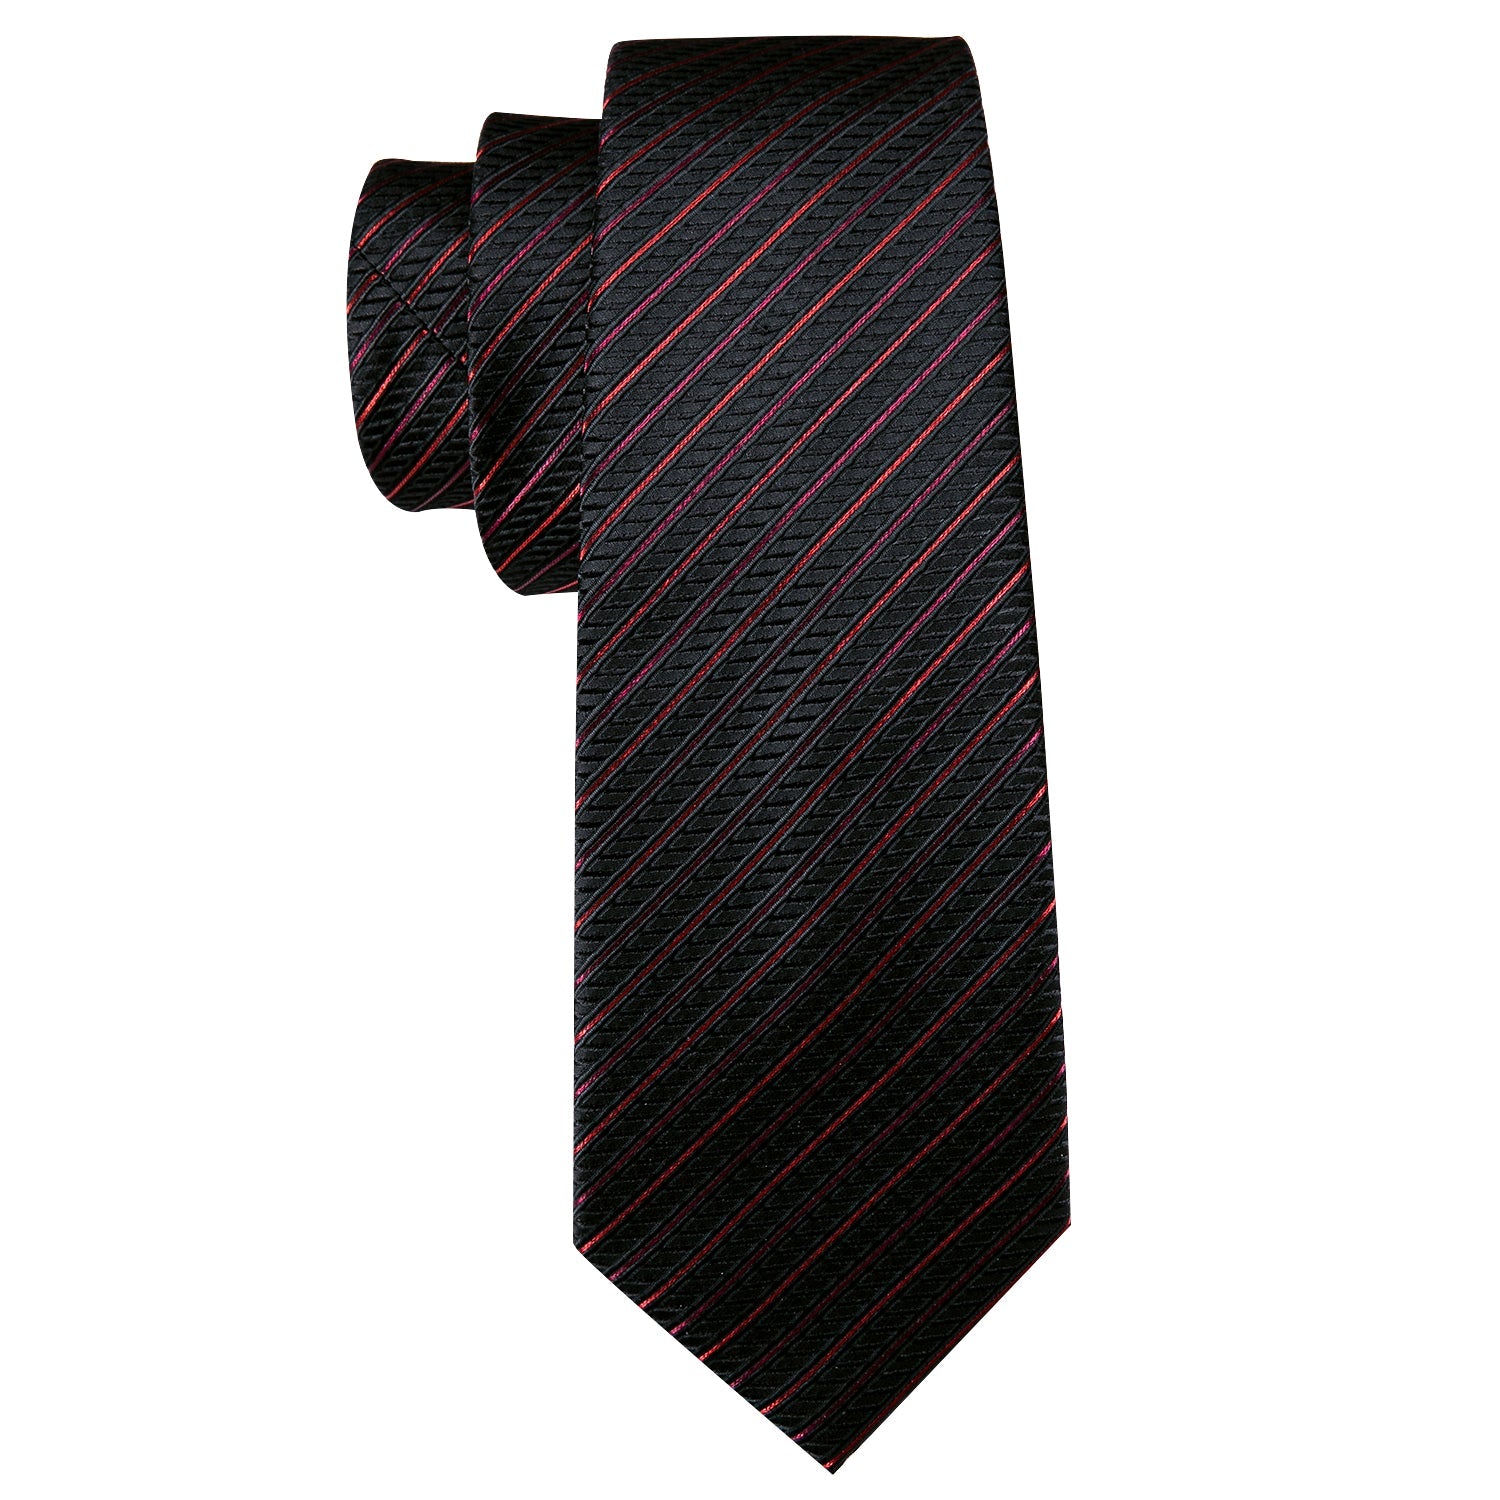 Black and Red Men Tie with Hanky Set Striped Silk - T4x Quadruple Love